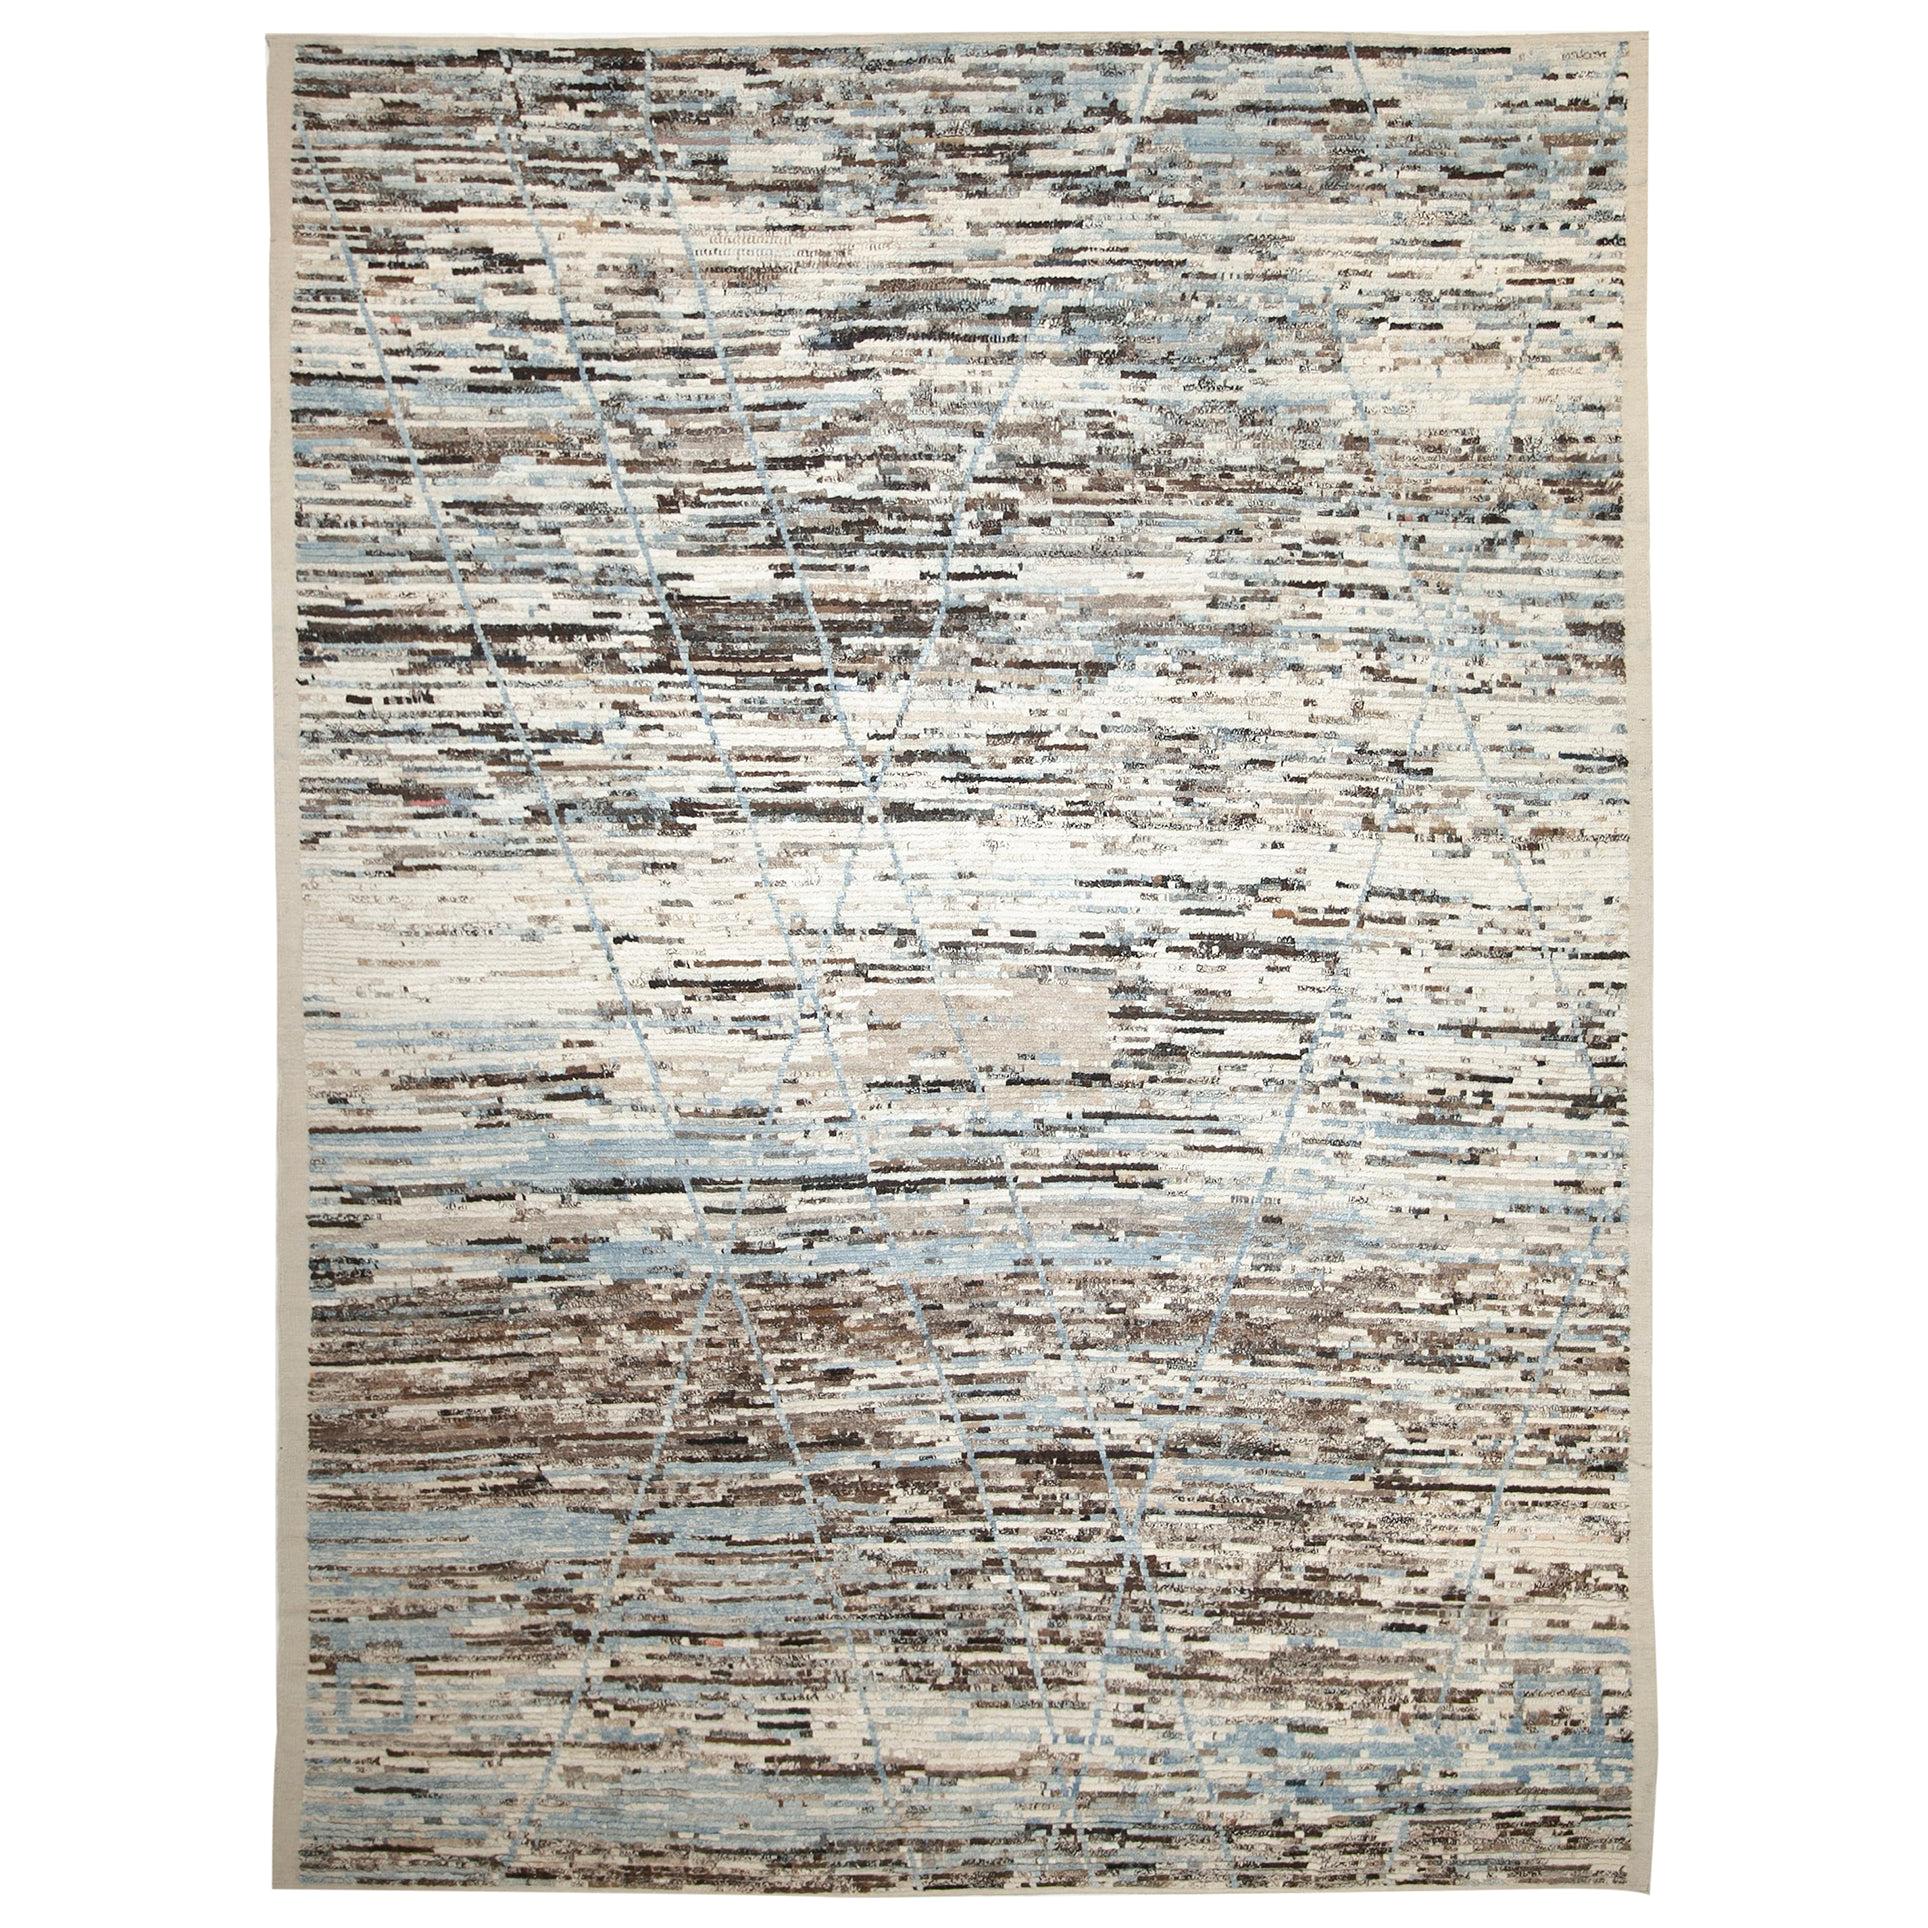 Nazmiyal Collection Beige Modern Moroccan Style Rug. 10 ft 5 in x 13 ft 7 in